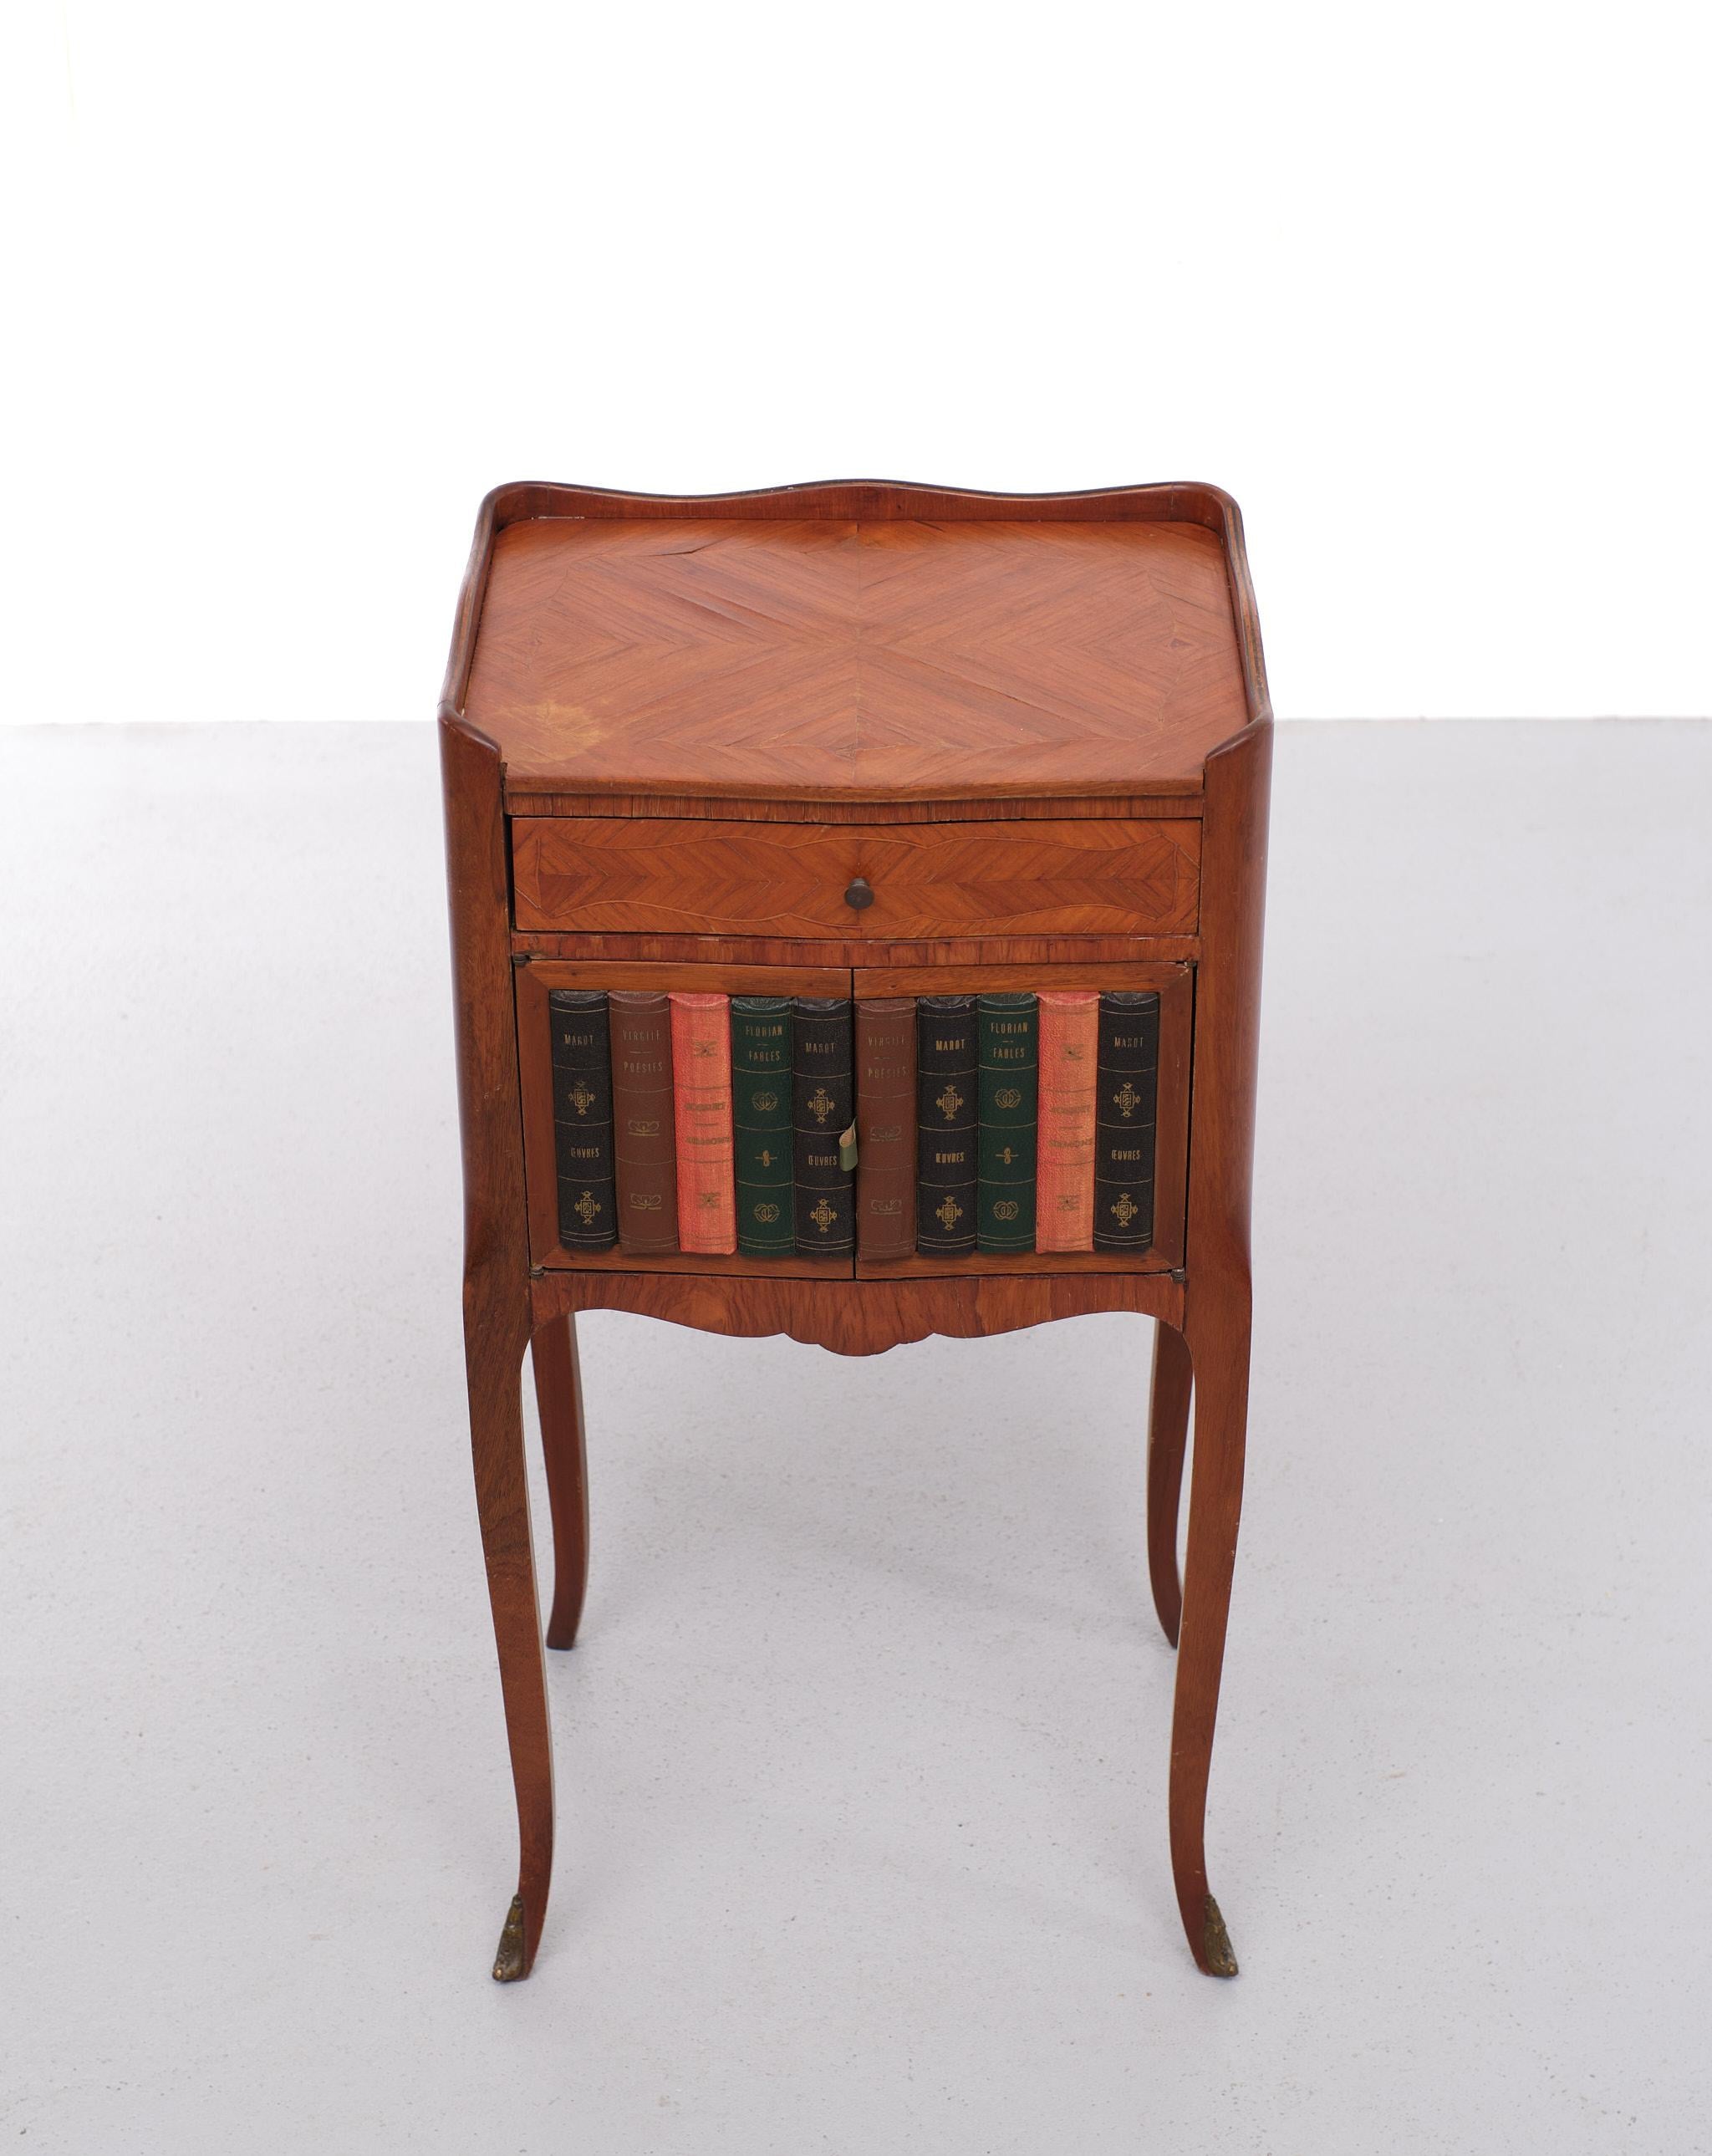 Very nice attractive classic side table. In a Louis xvi style. Nice inlay wood.
Bronze feet ,On the front doors Book-covers.